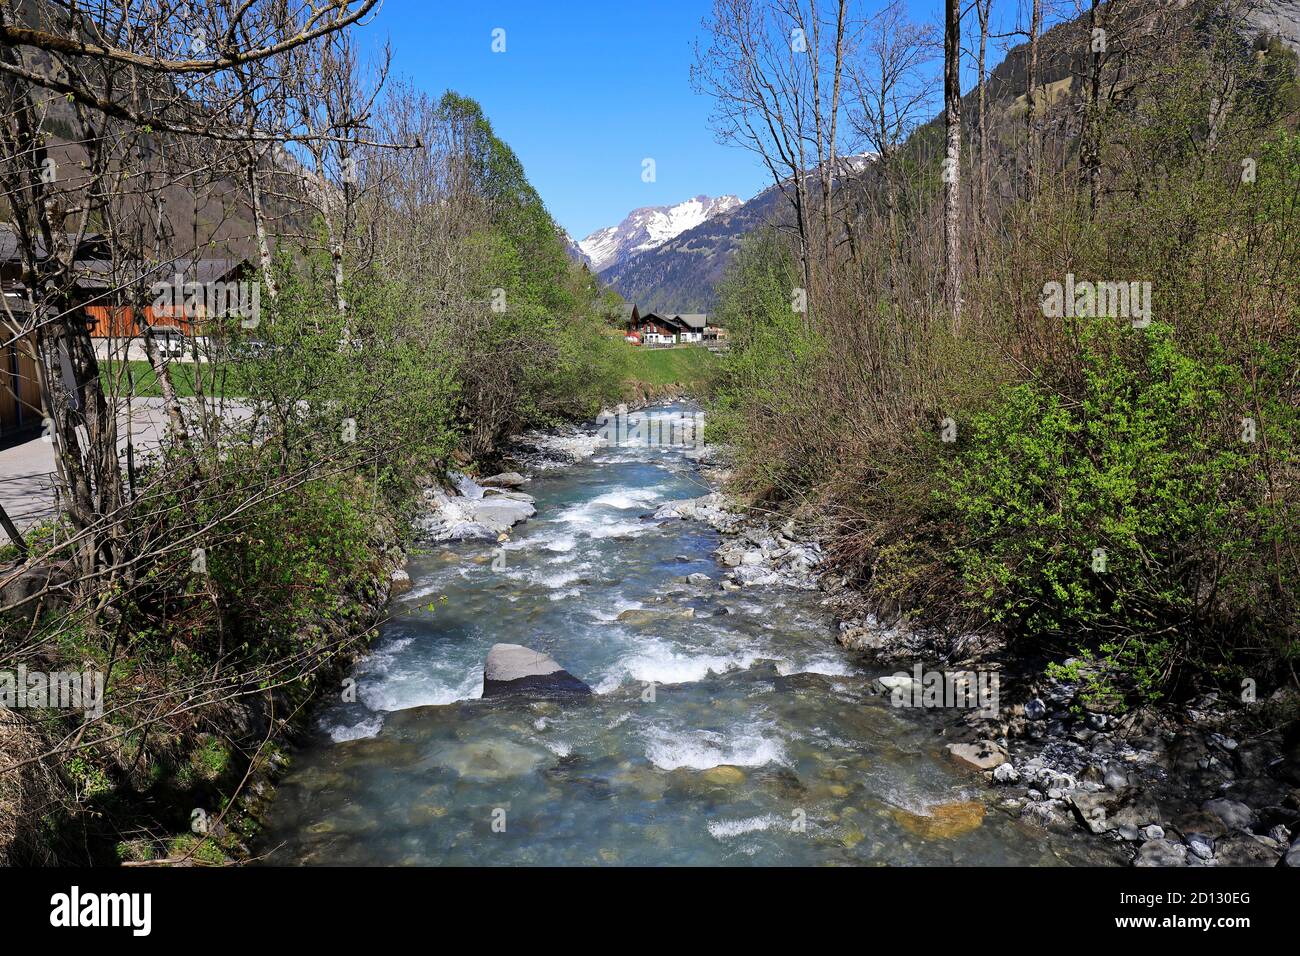 Sernf river with clear fresh water close to the village of Elm, Glarus, Switzerland Stock Photo